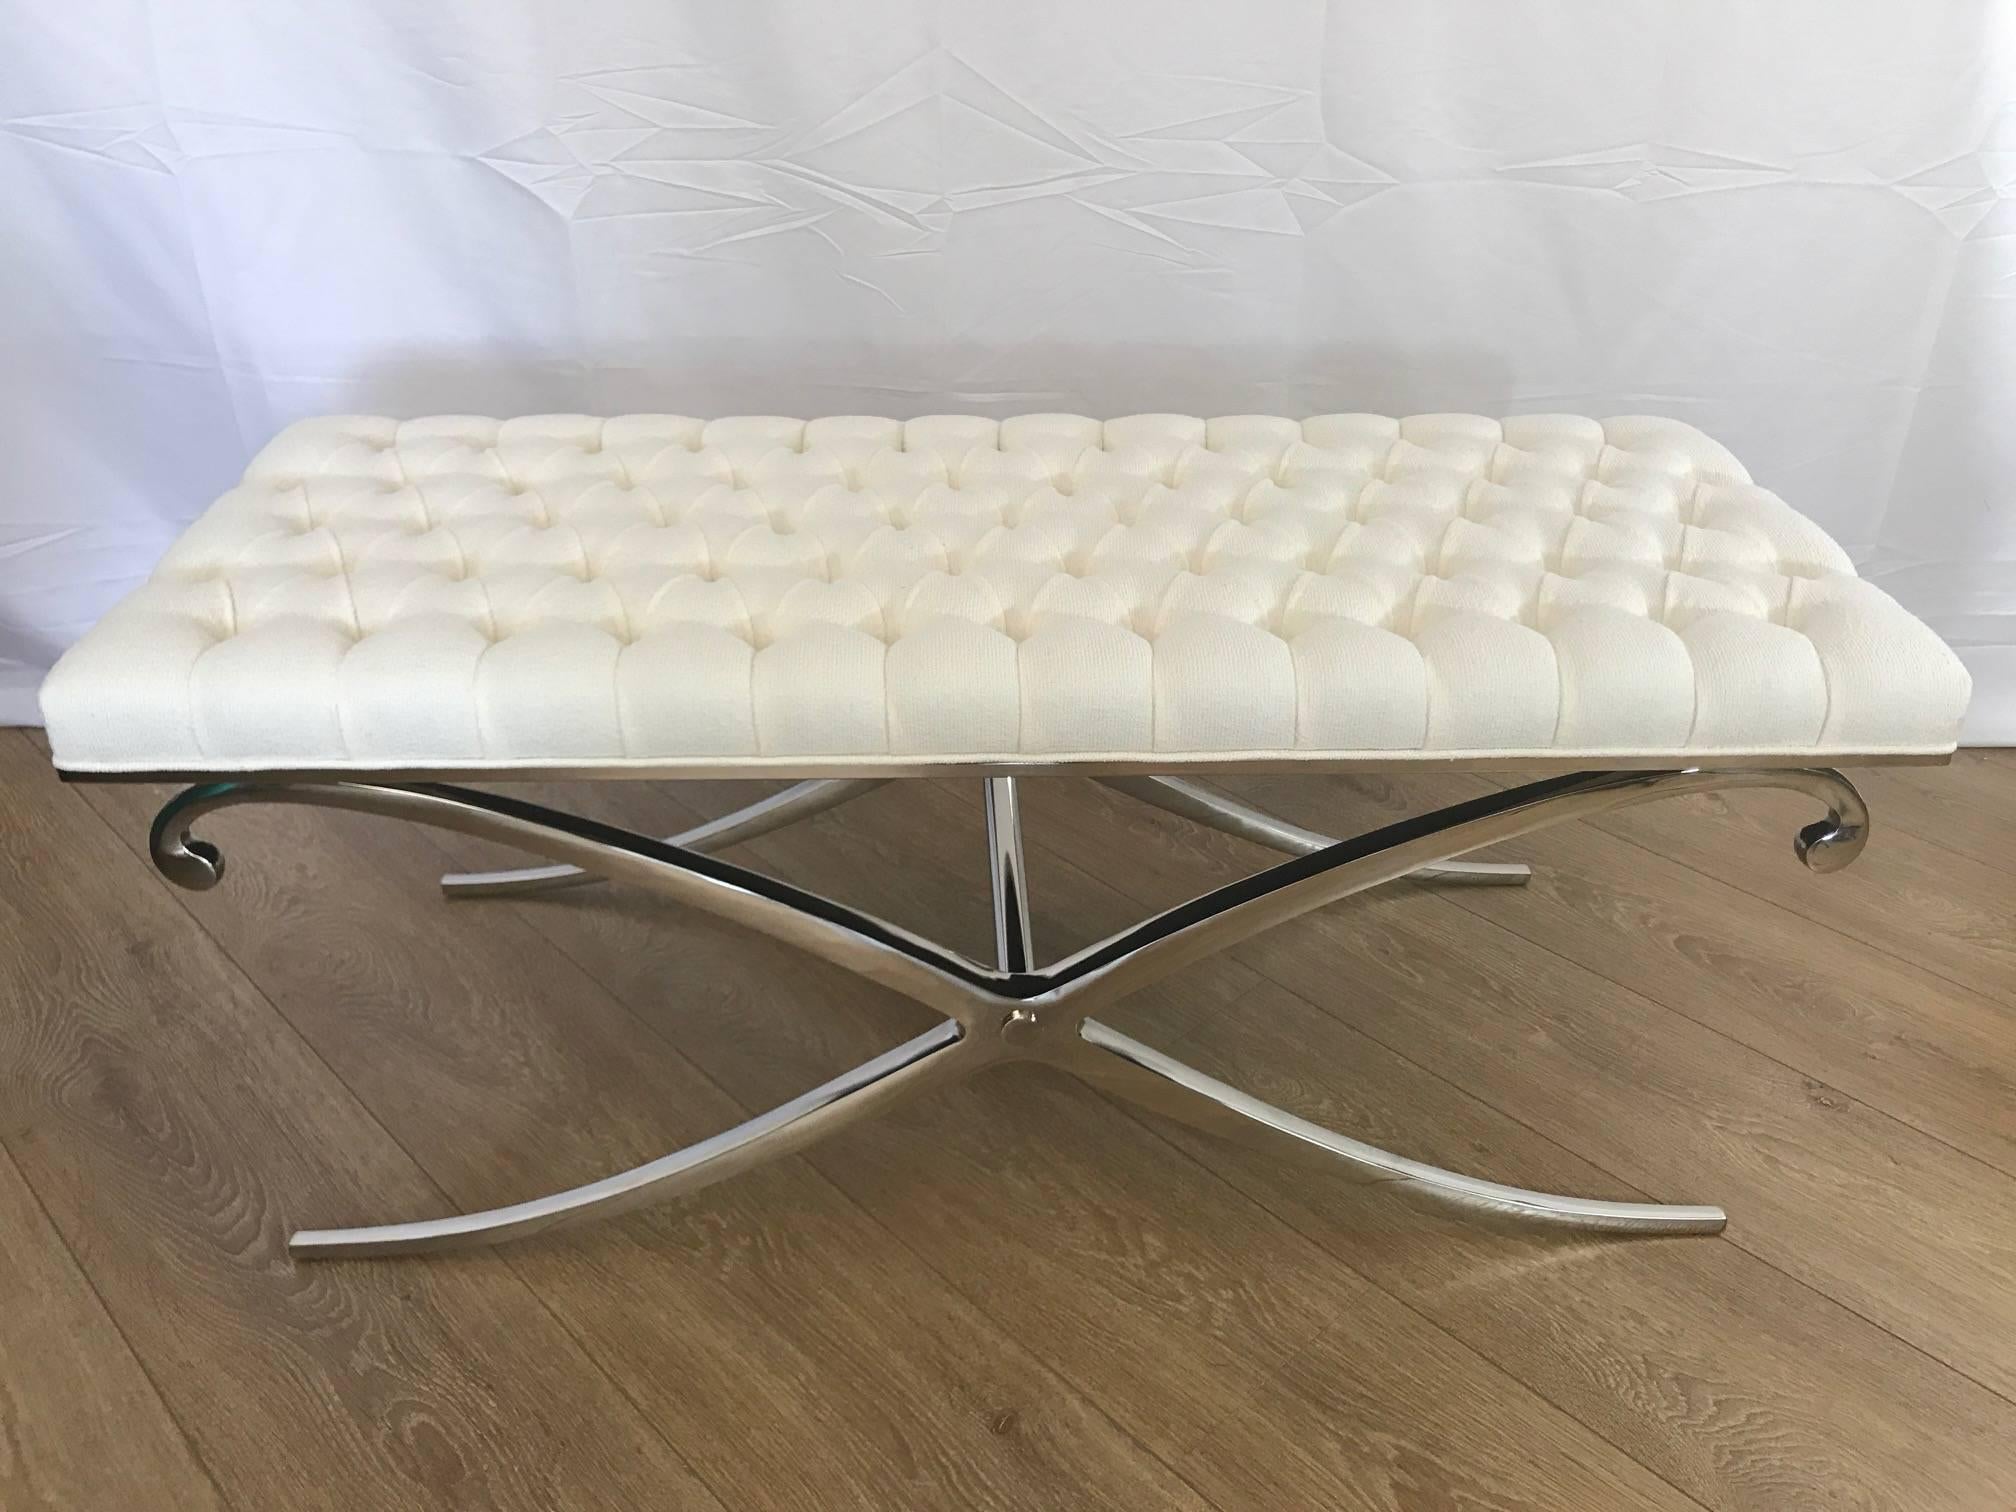 Elegant pair of neoclassical nickel plated X-base benches. Newly upholstered with white bouclé fabric.
Since they can be purchased separately, price is per item.